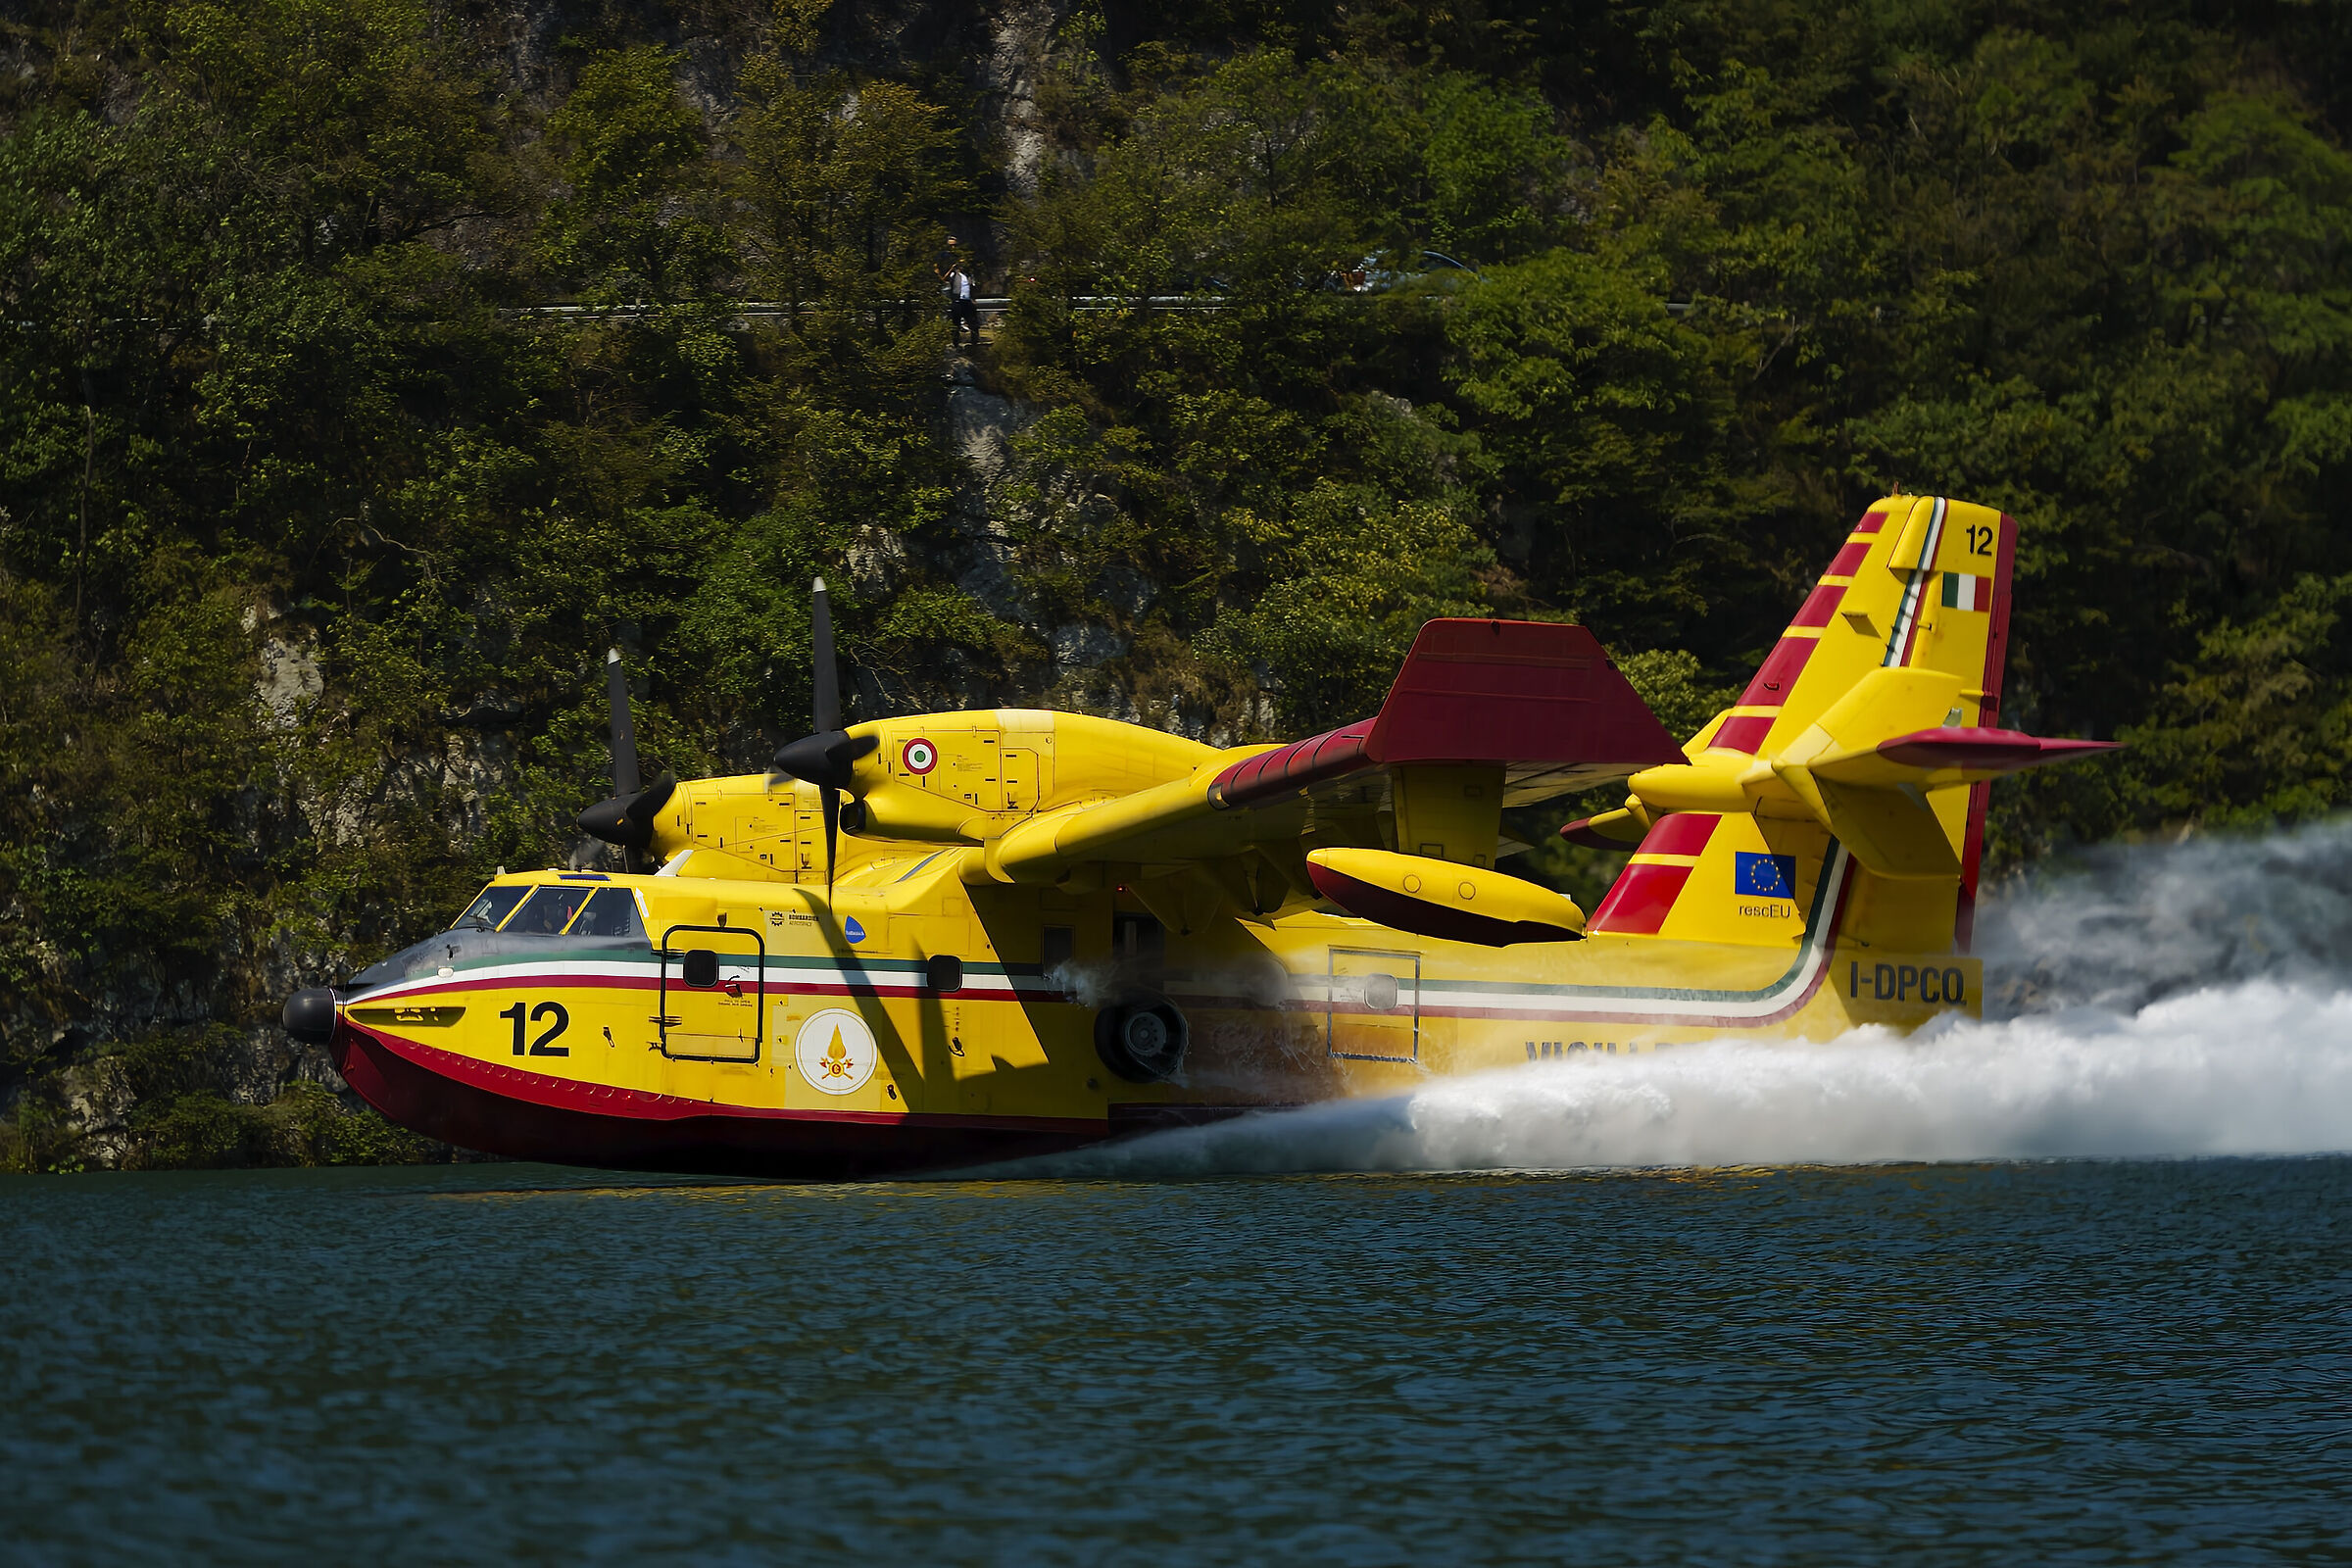 Canadair in action...